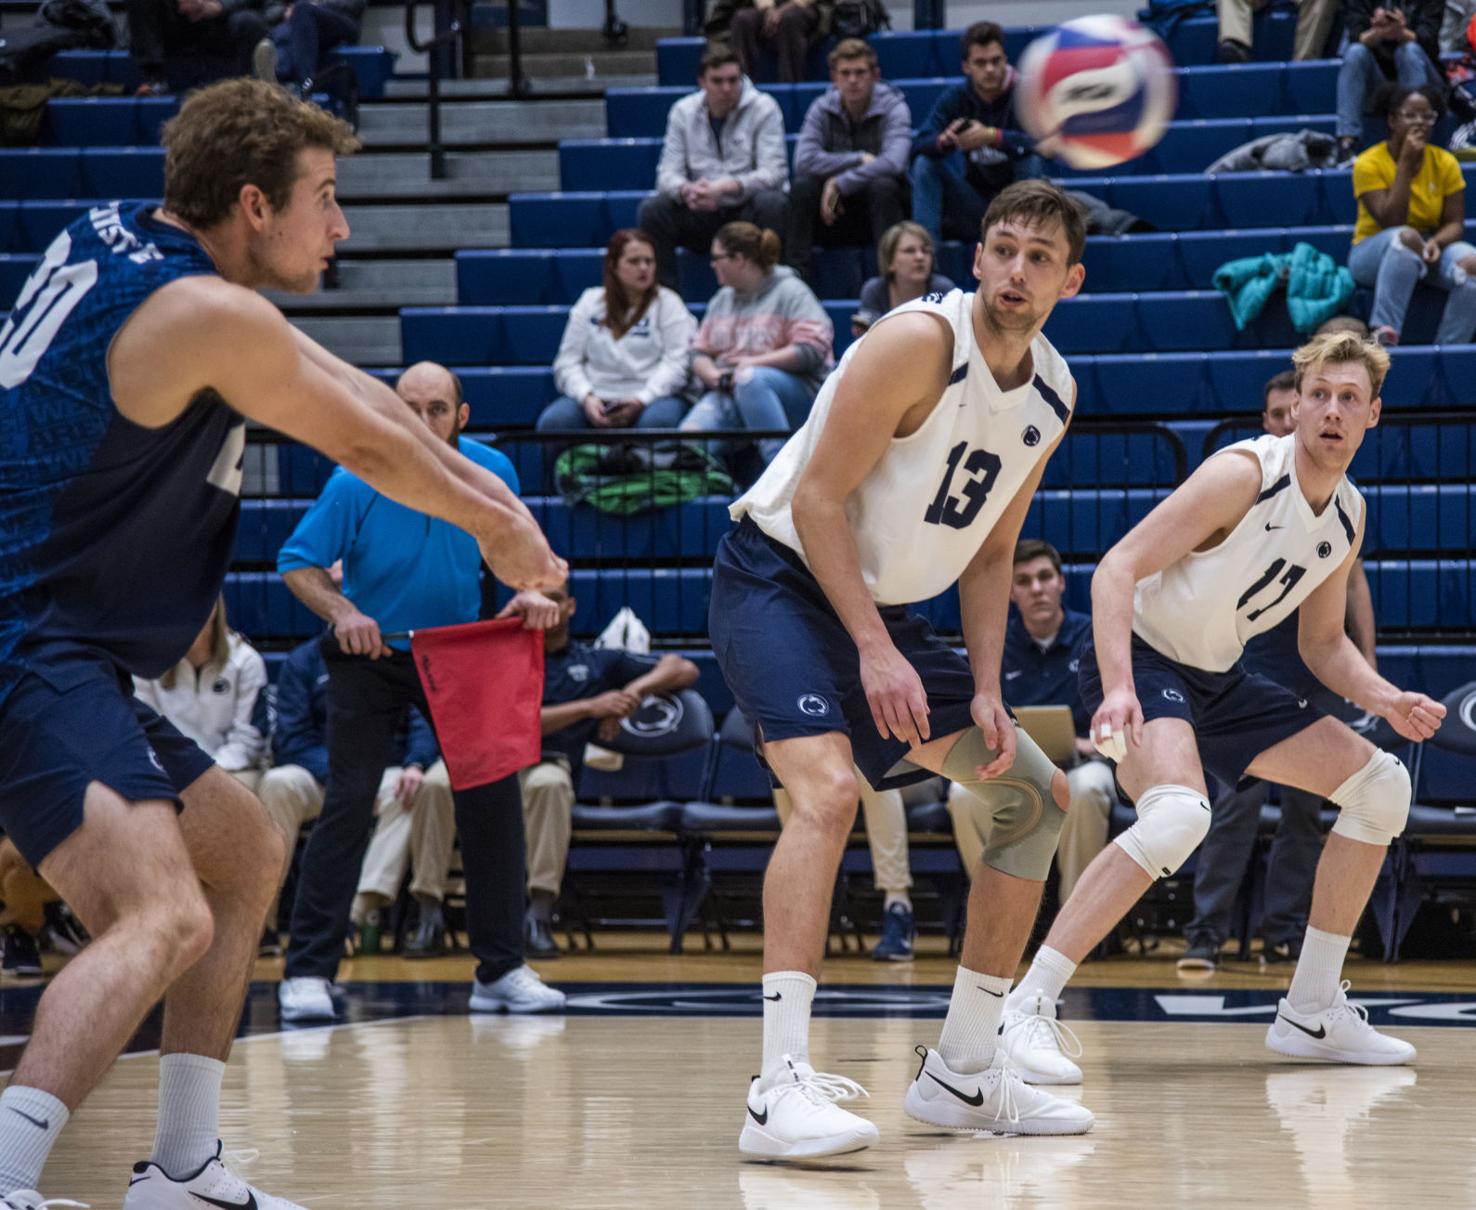 Penn State men’s volleyball sweeps McKendree for second straight win